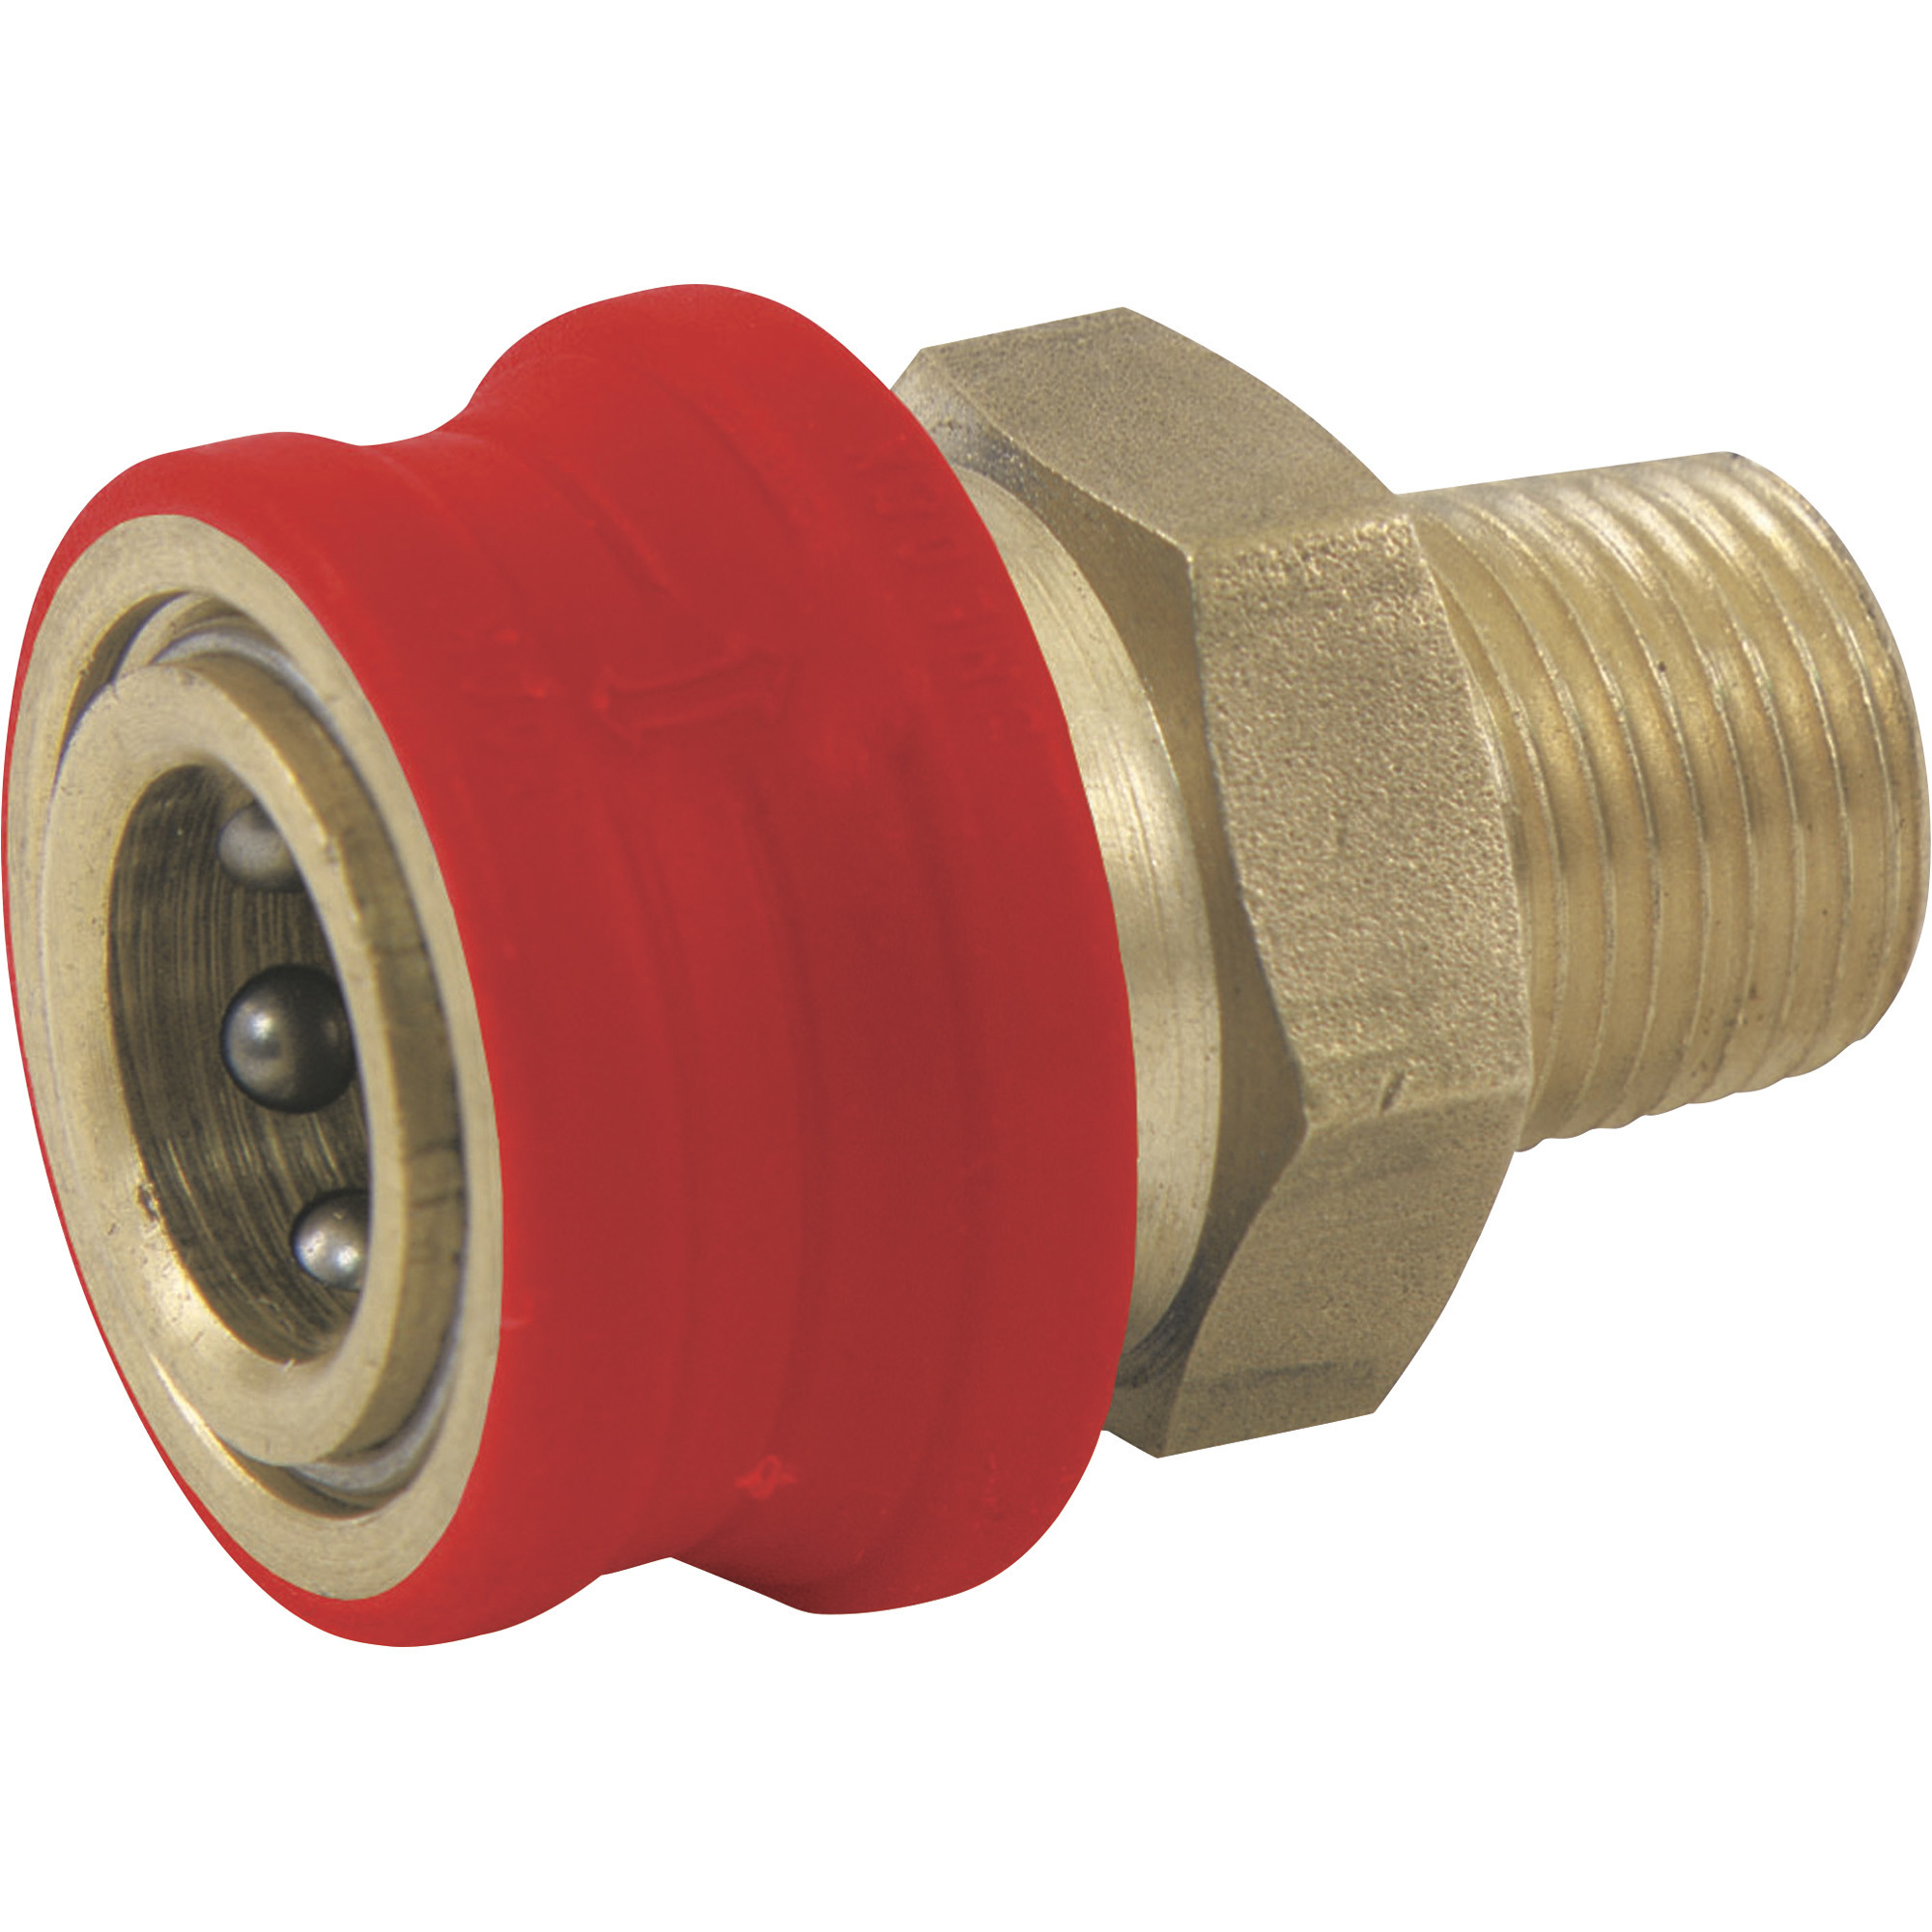 NorthStar Pressure Washer Insulated Quick-Connect Coupler â 3/8Inch NPT-M, 4500 PSI, 12.0 GPM, Brass, Model 2100384P